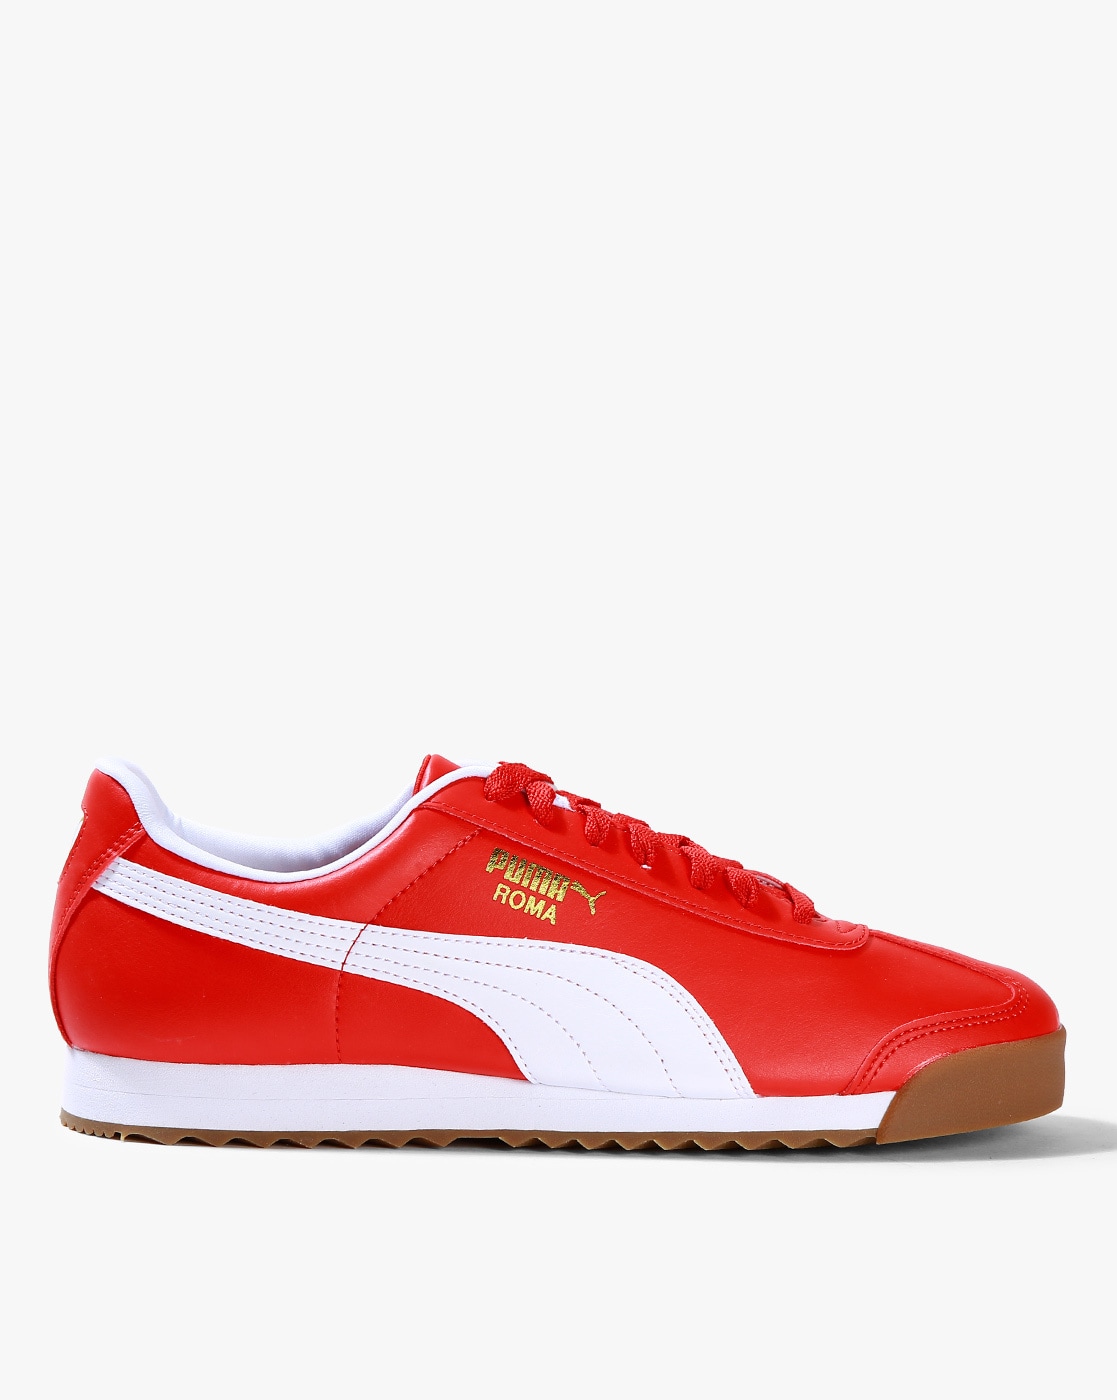 Onitsuka Tiger Mexico 66 Mens Slip-On (Size 11,Red) in Gurgaon at best  price by Asics India Pvt Ltd (Head Offfice) - Justdial